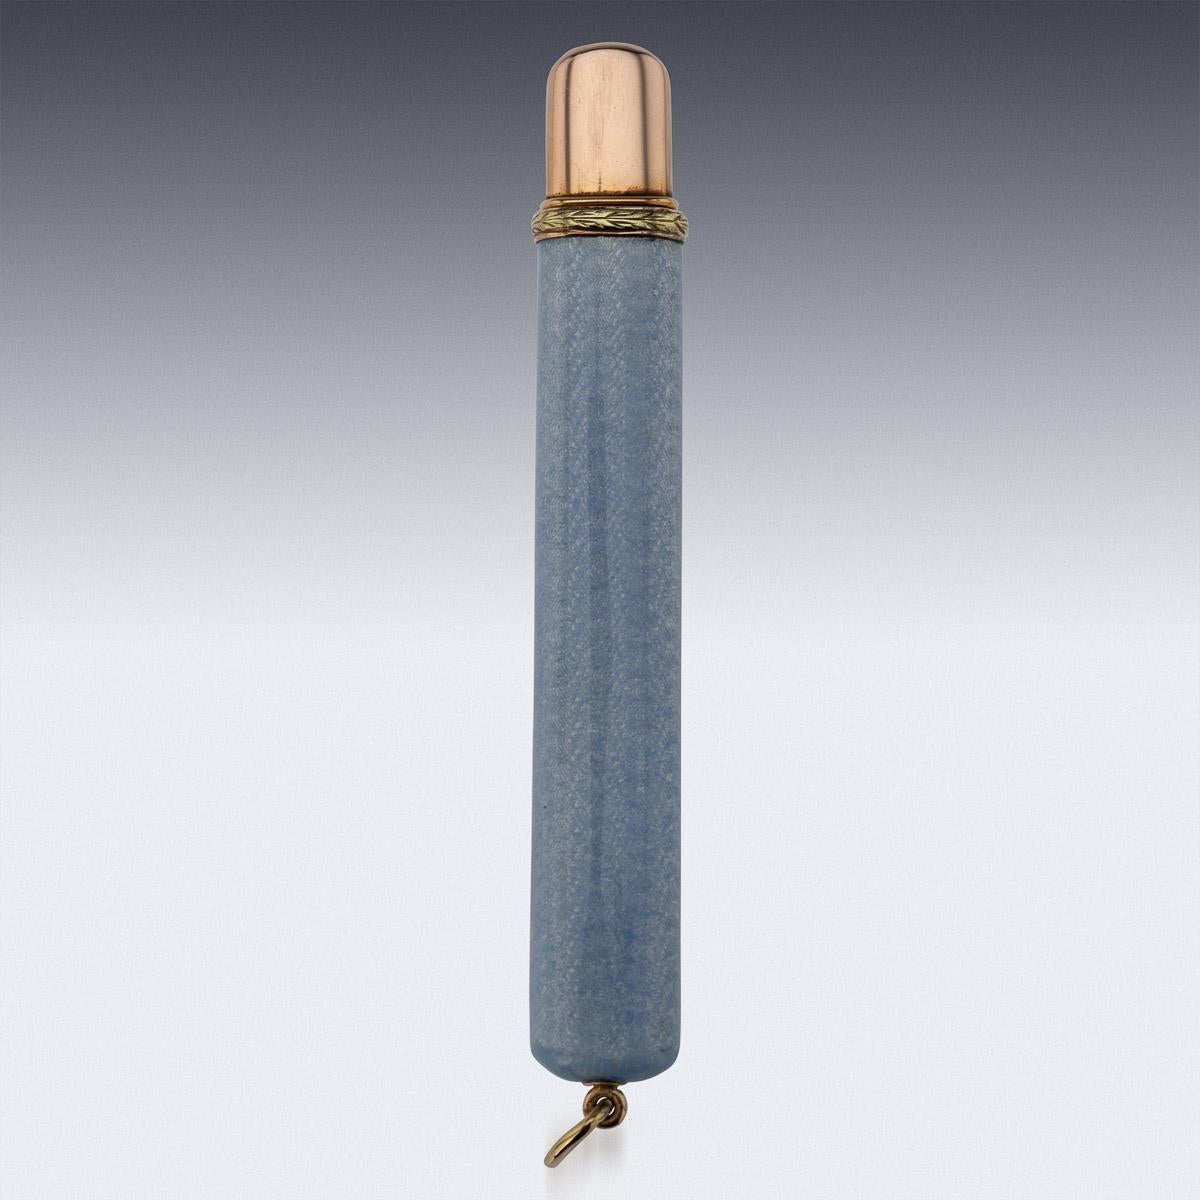 Antique early-20th Century Imperial Russian two-colour gold-mounted guilloche enamel pencil holder, of flattened rectangular form, enameled in translucent ice blue over a wavy guilloché ground, the gold collar decorated with gold leaf boarder.